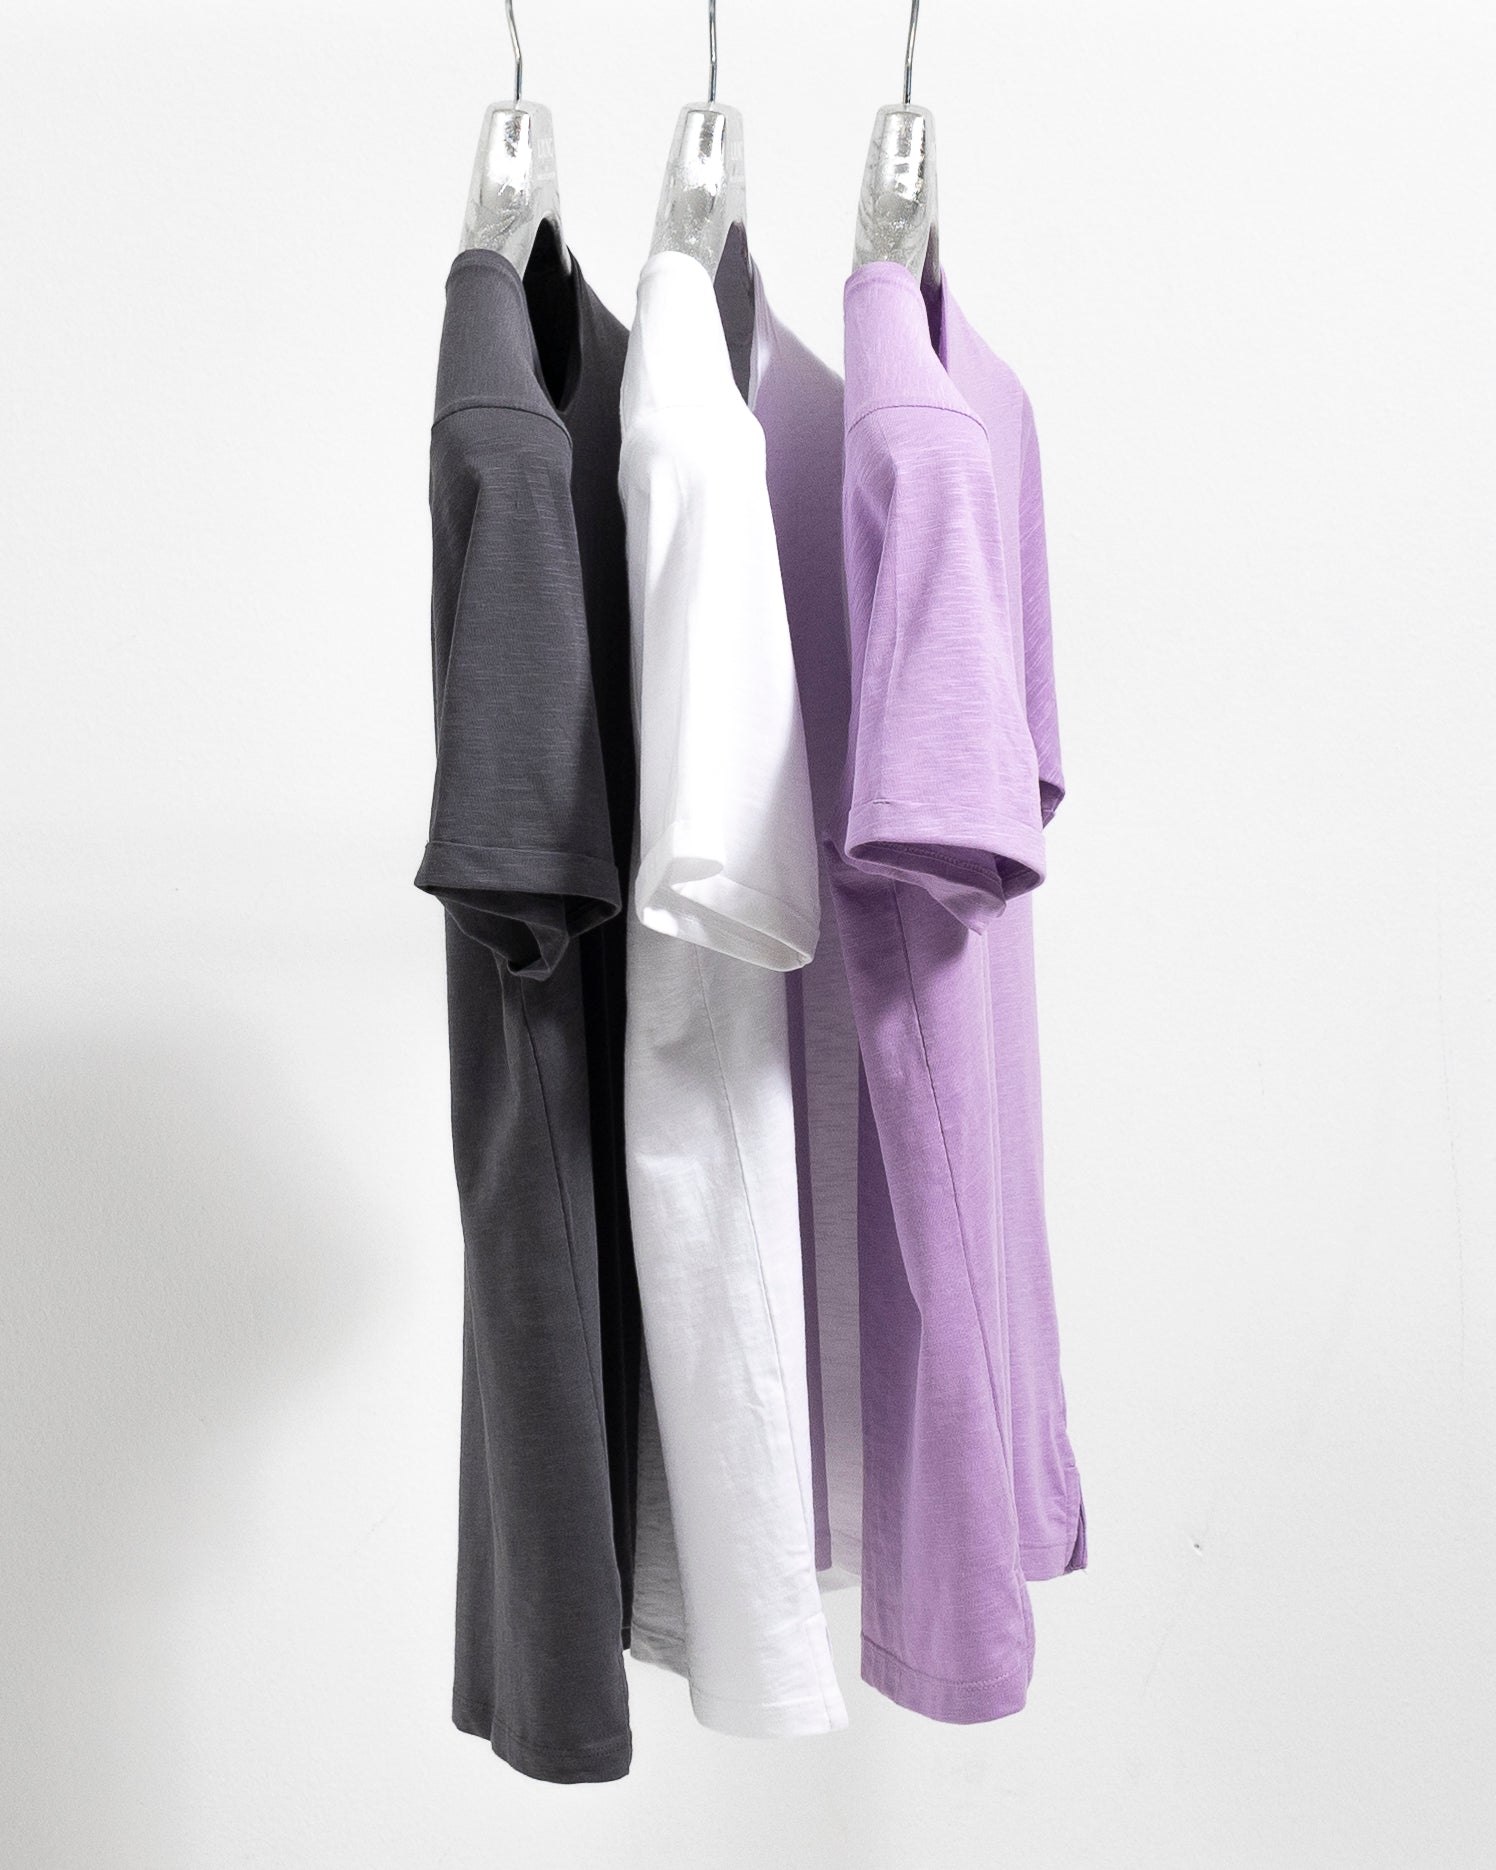 Core Tee 3 Pack - Gun Metal Grey/ White/ Dusty Orchid